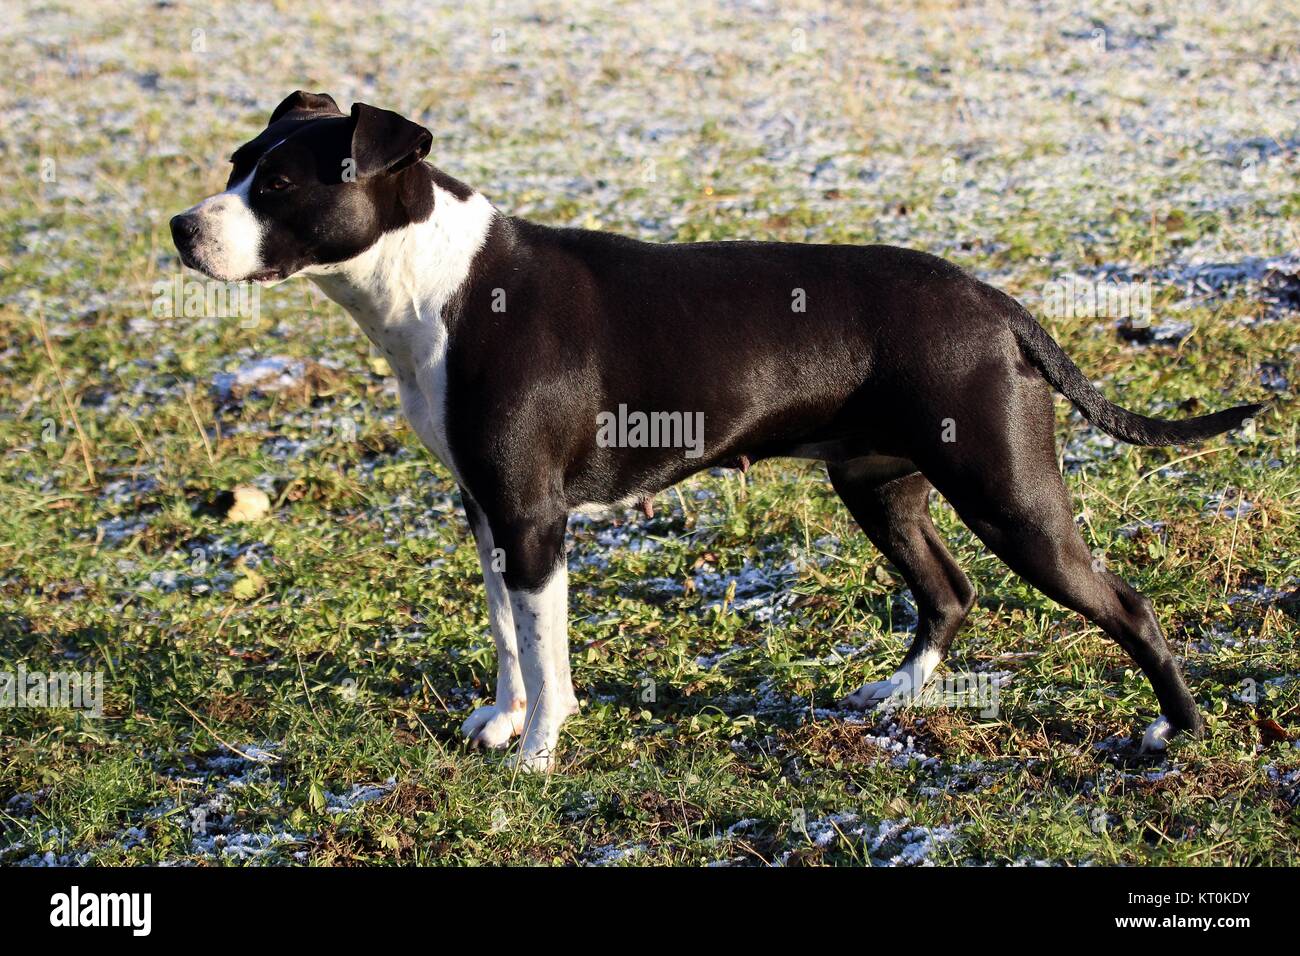 Amstaff dog stands on frozen grass Stock Photo